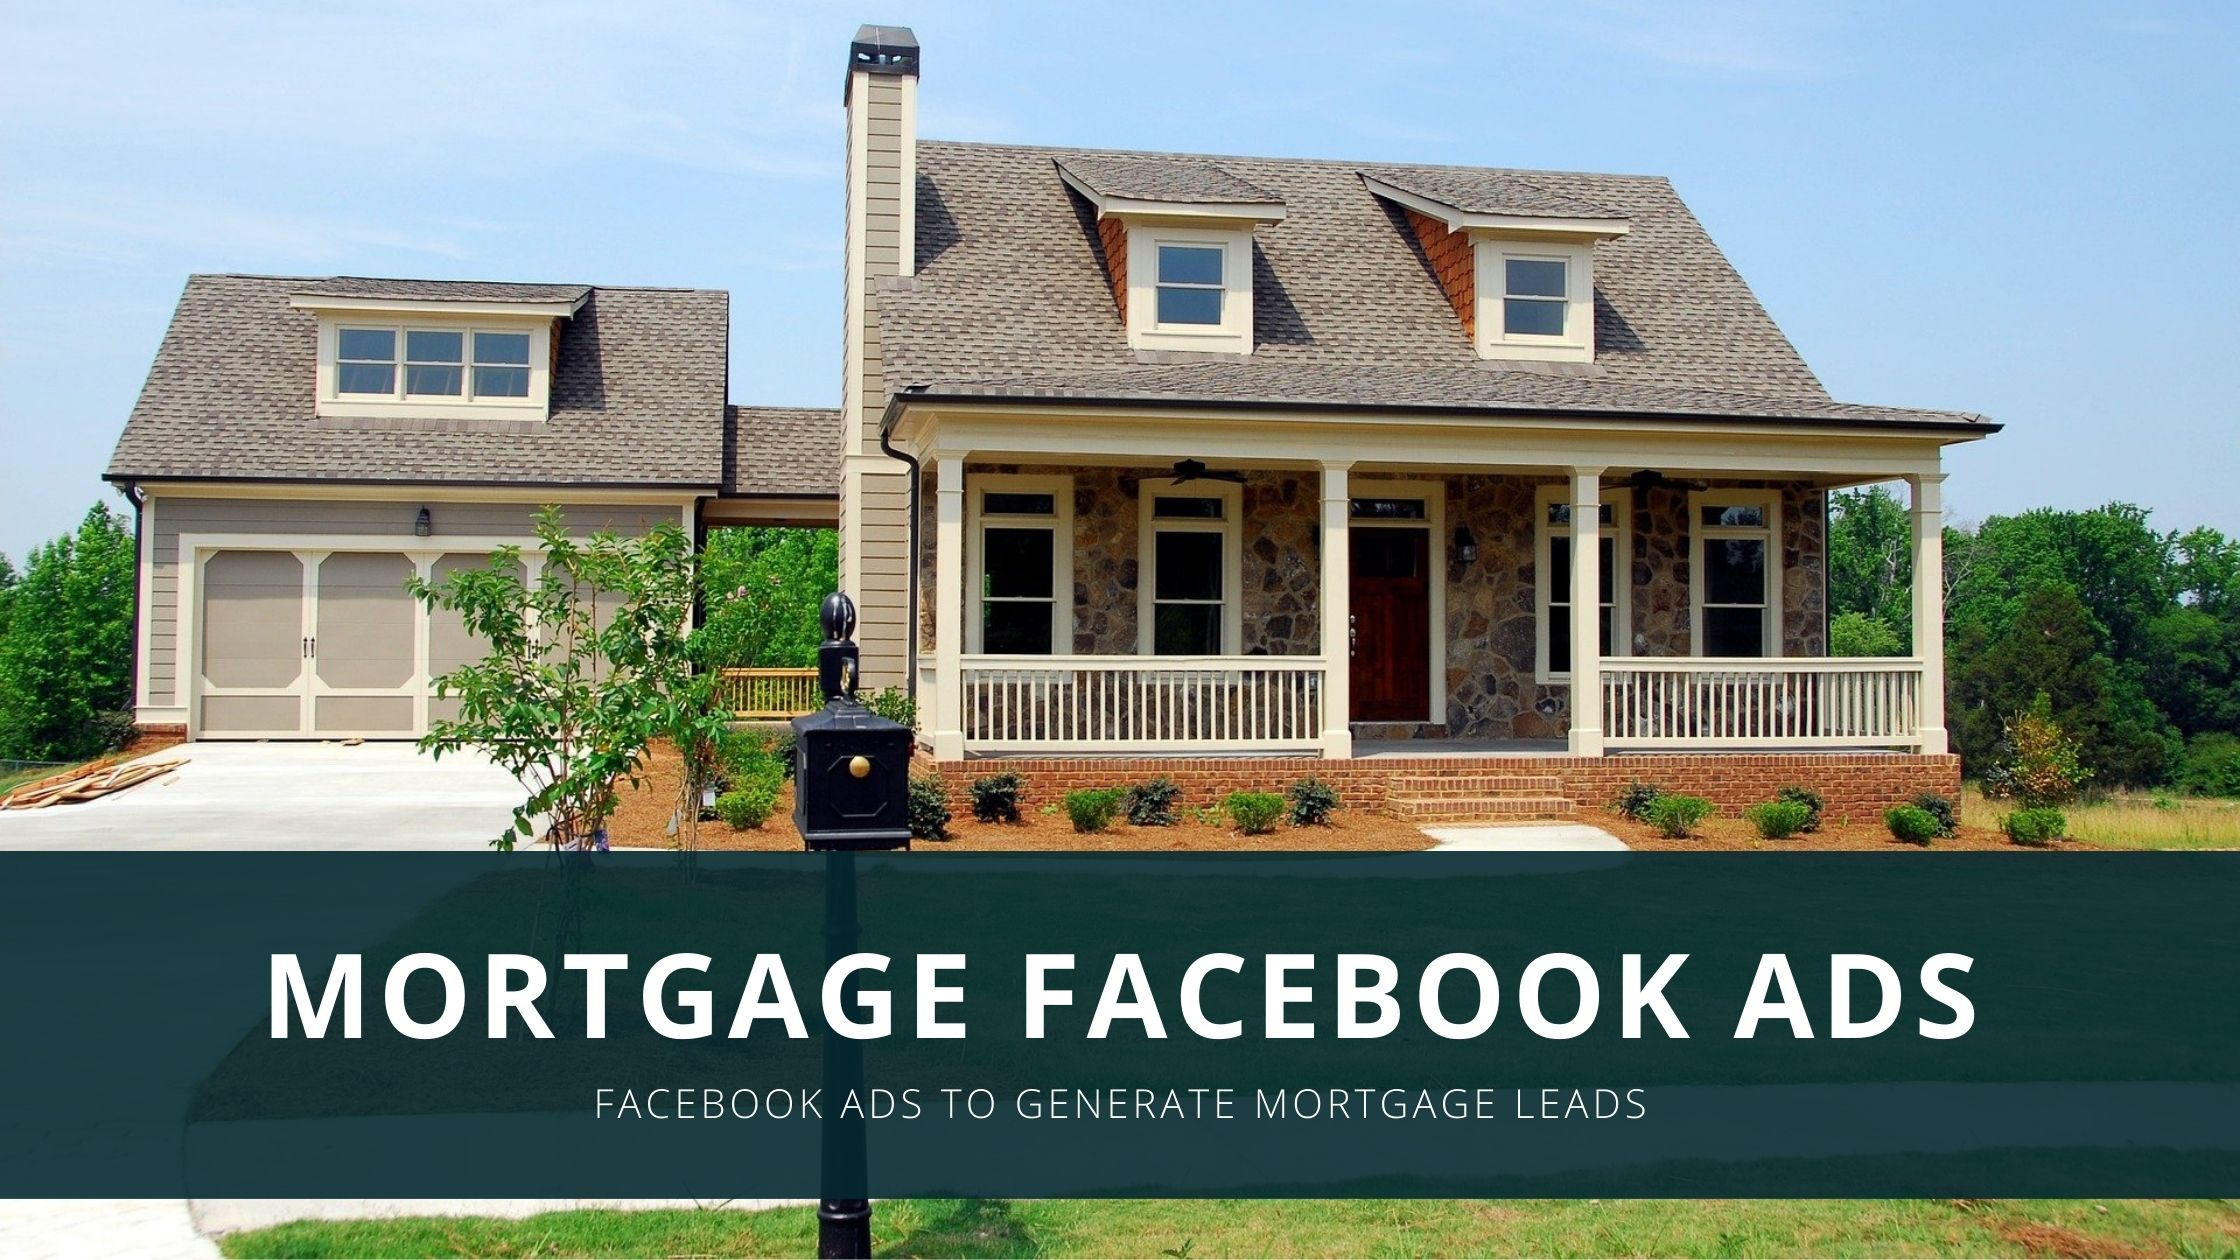 How To Use Facebook Ads To Generate Mortgage Leads